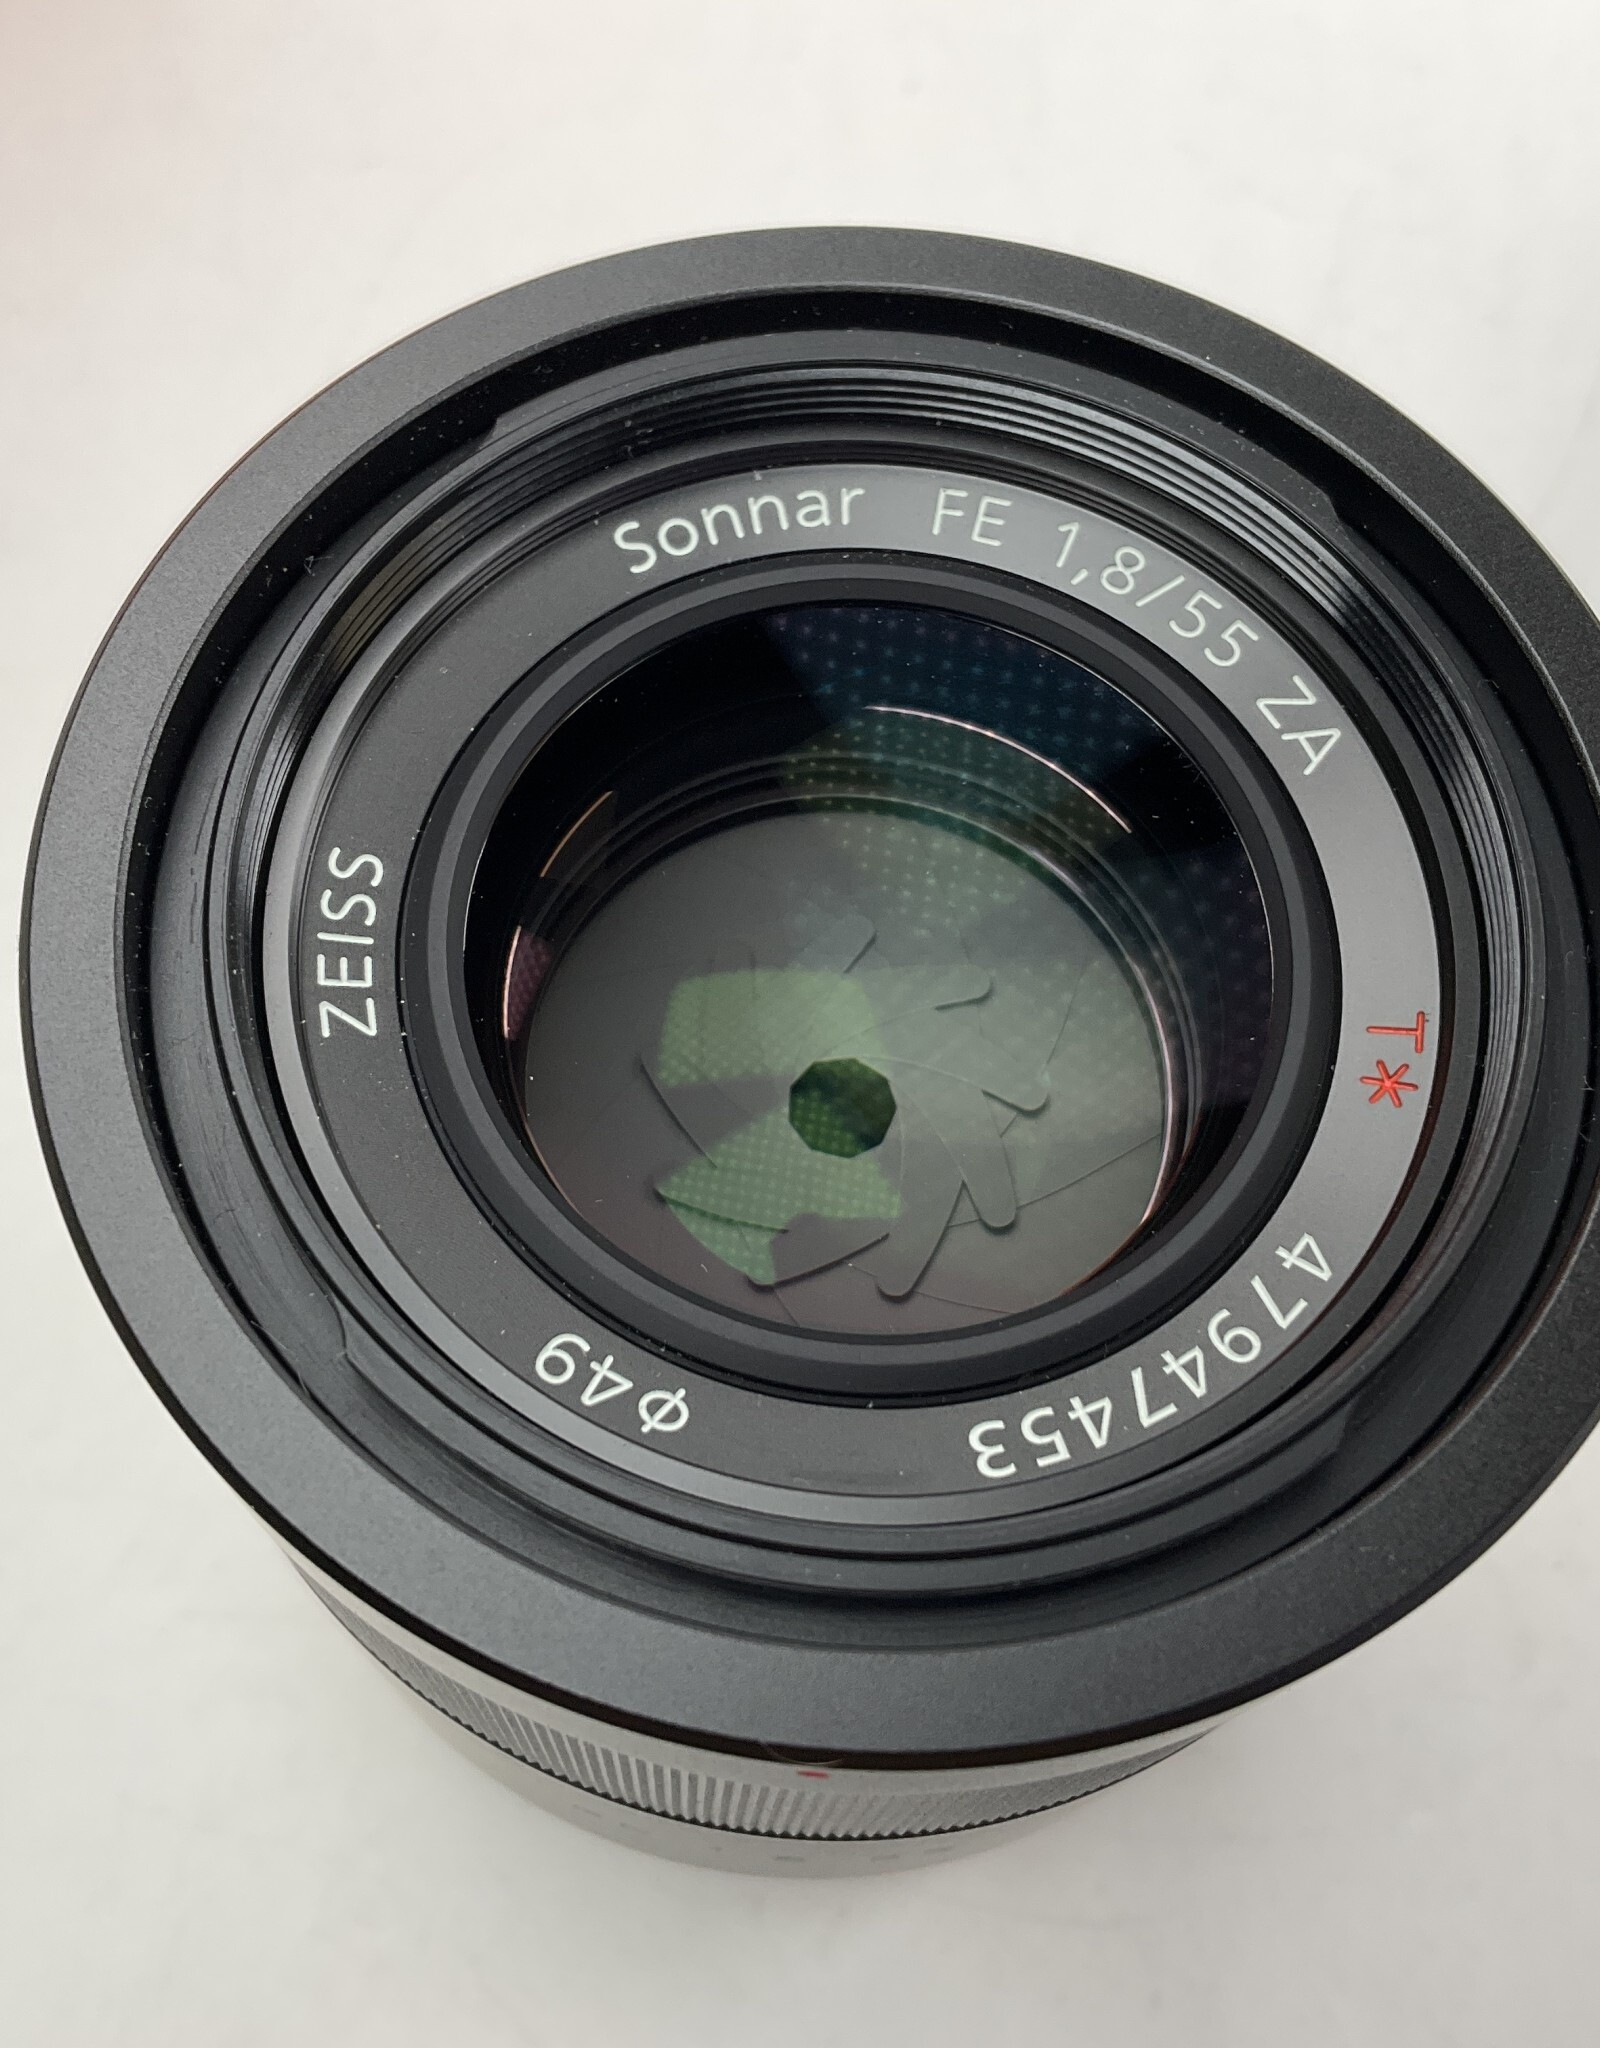 SONY Sony Zeiss Sonnar FE 55mm f1.8 ZA Lens in Box Used EX